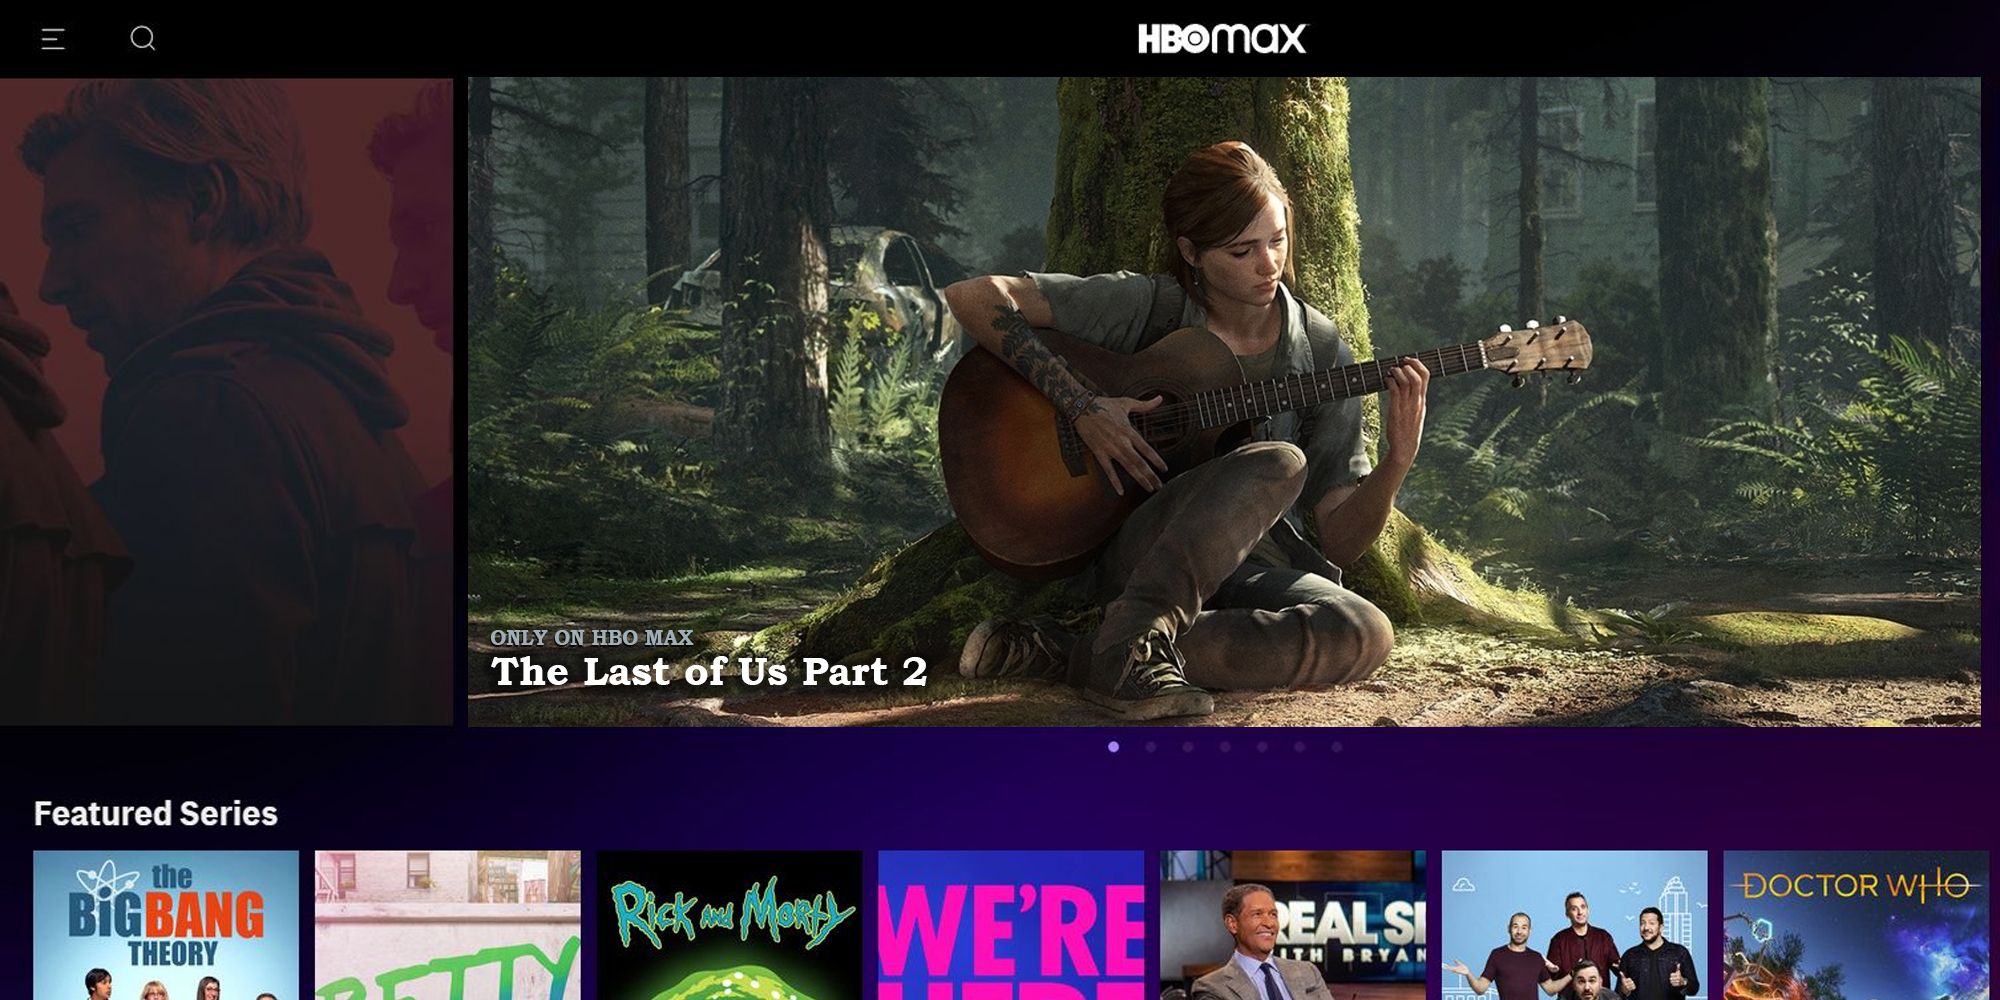 TLOU2 tile on the HBO Max home page